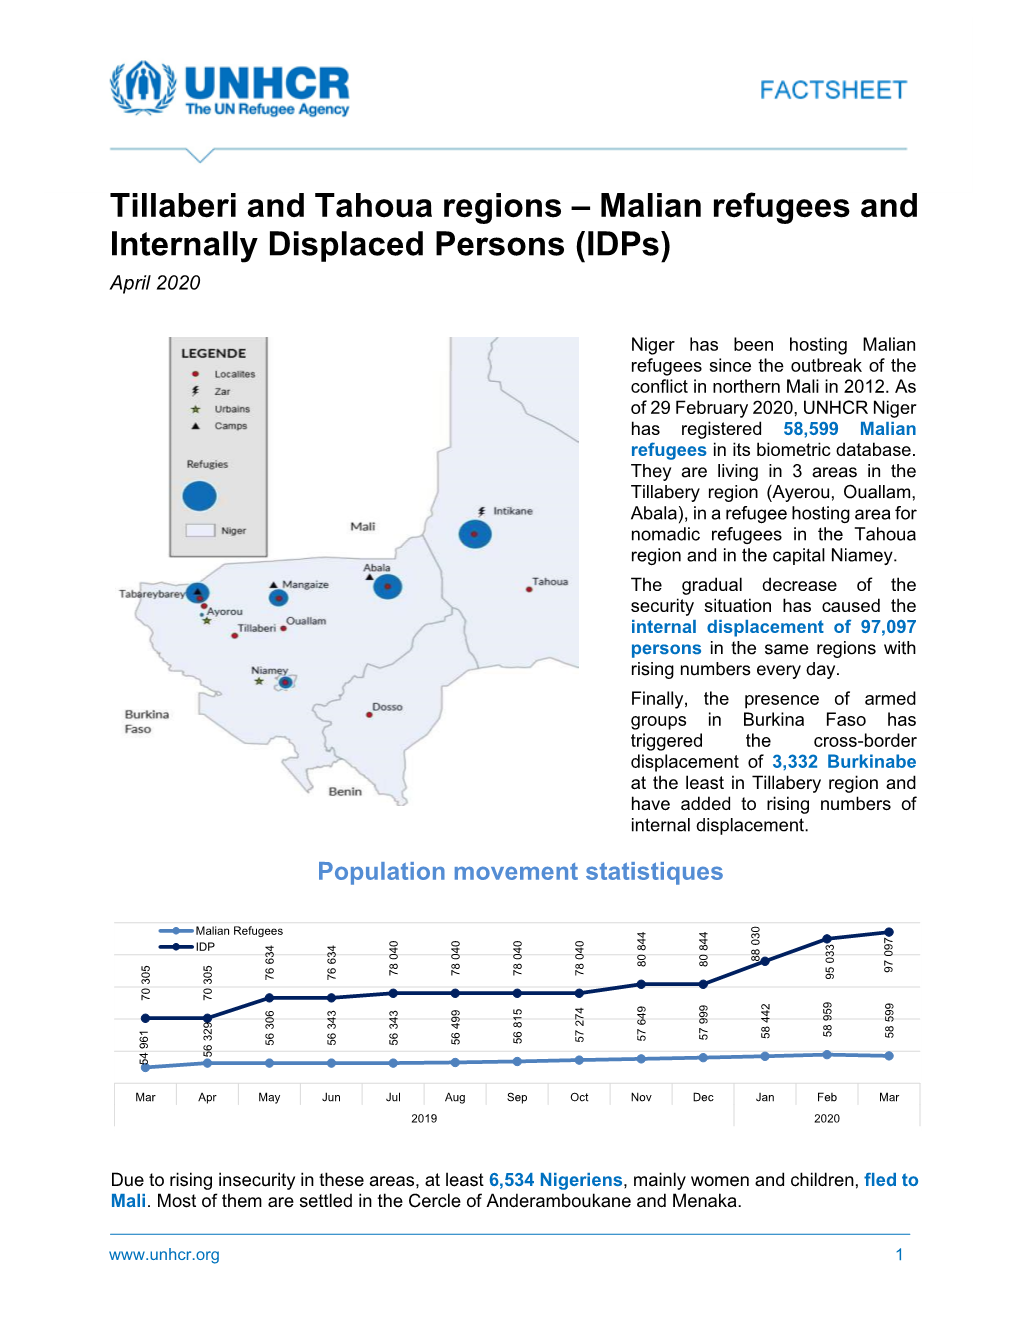 Tillaberi and Tahoua Regions – Malian Refugees and Internally Displaced Persons (Idps) April 2020